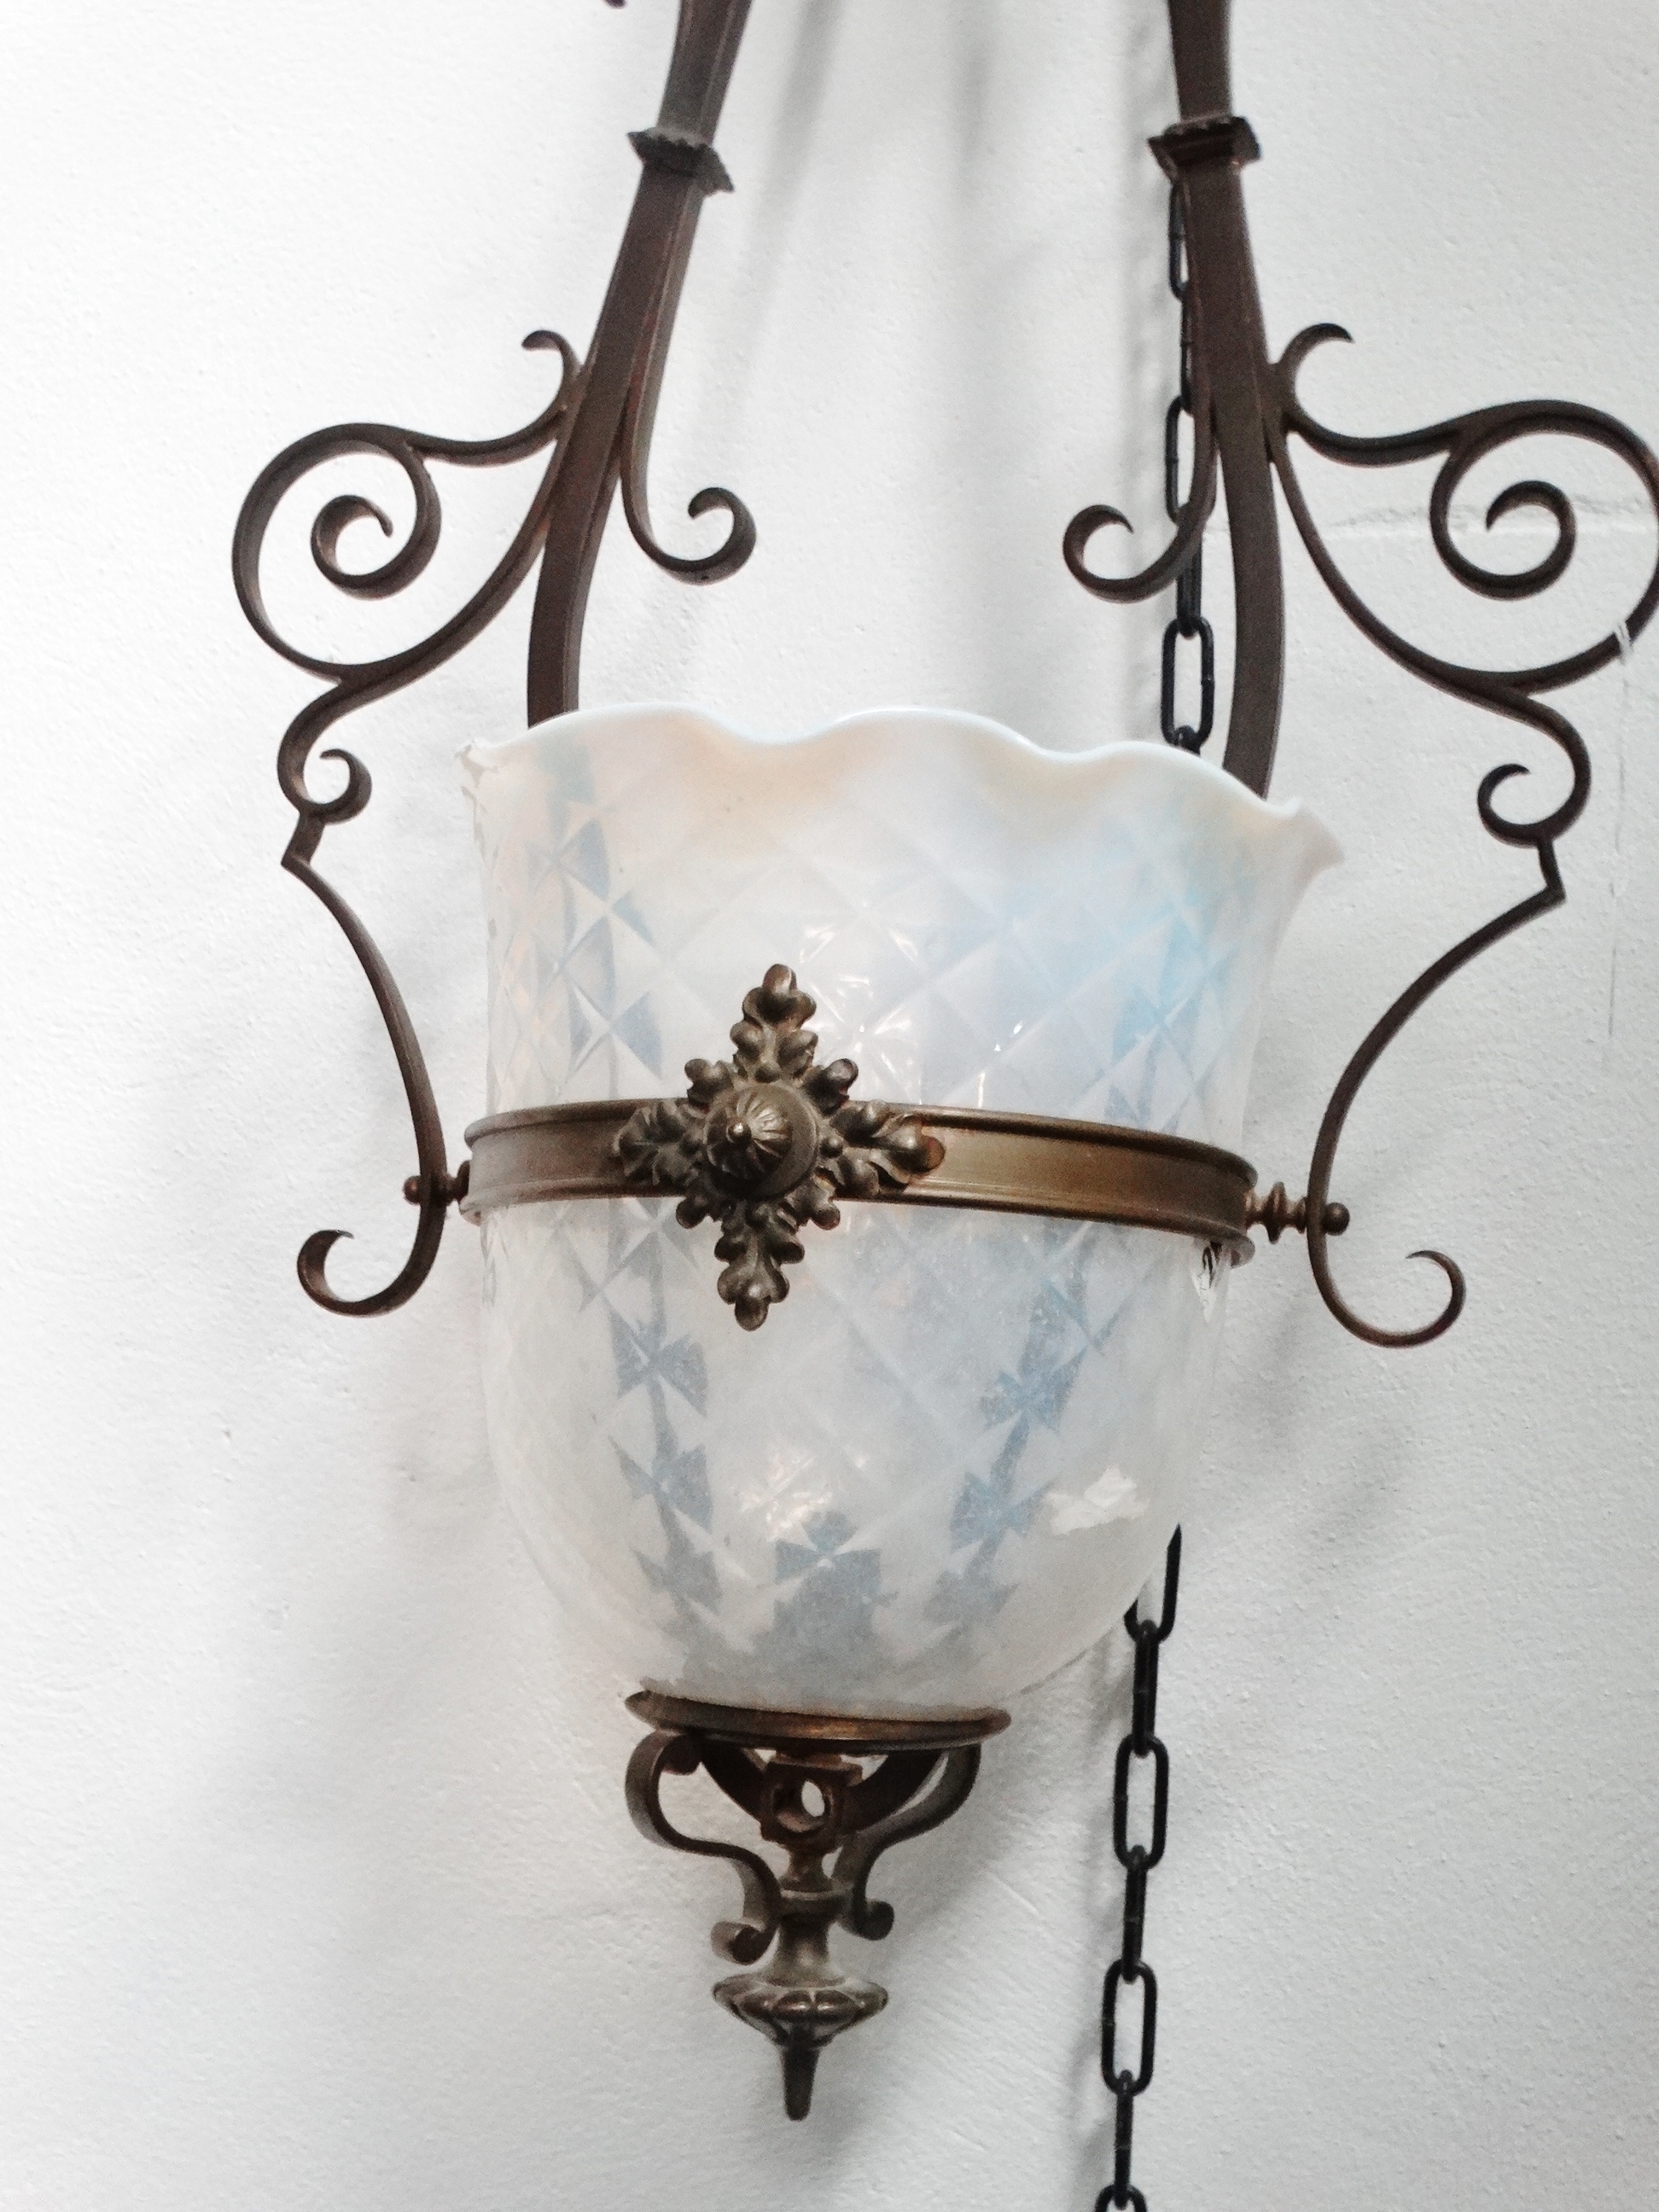 19th century vaseline glass and brass pendant light - An ornate light fitting with large dappled - Image 4 of 10